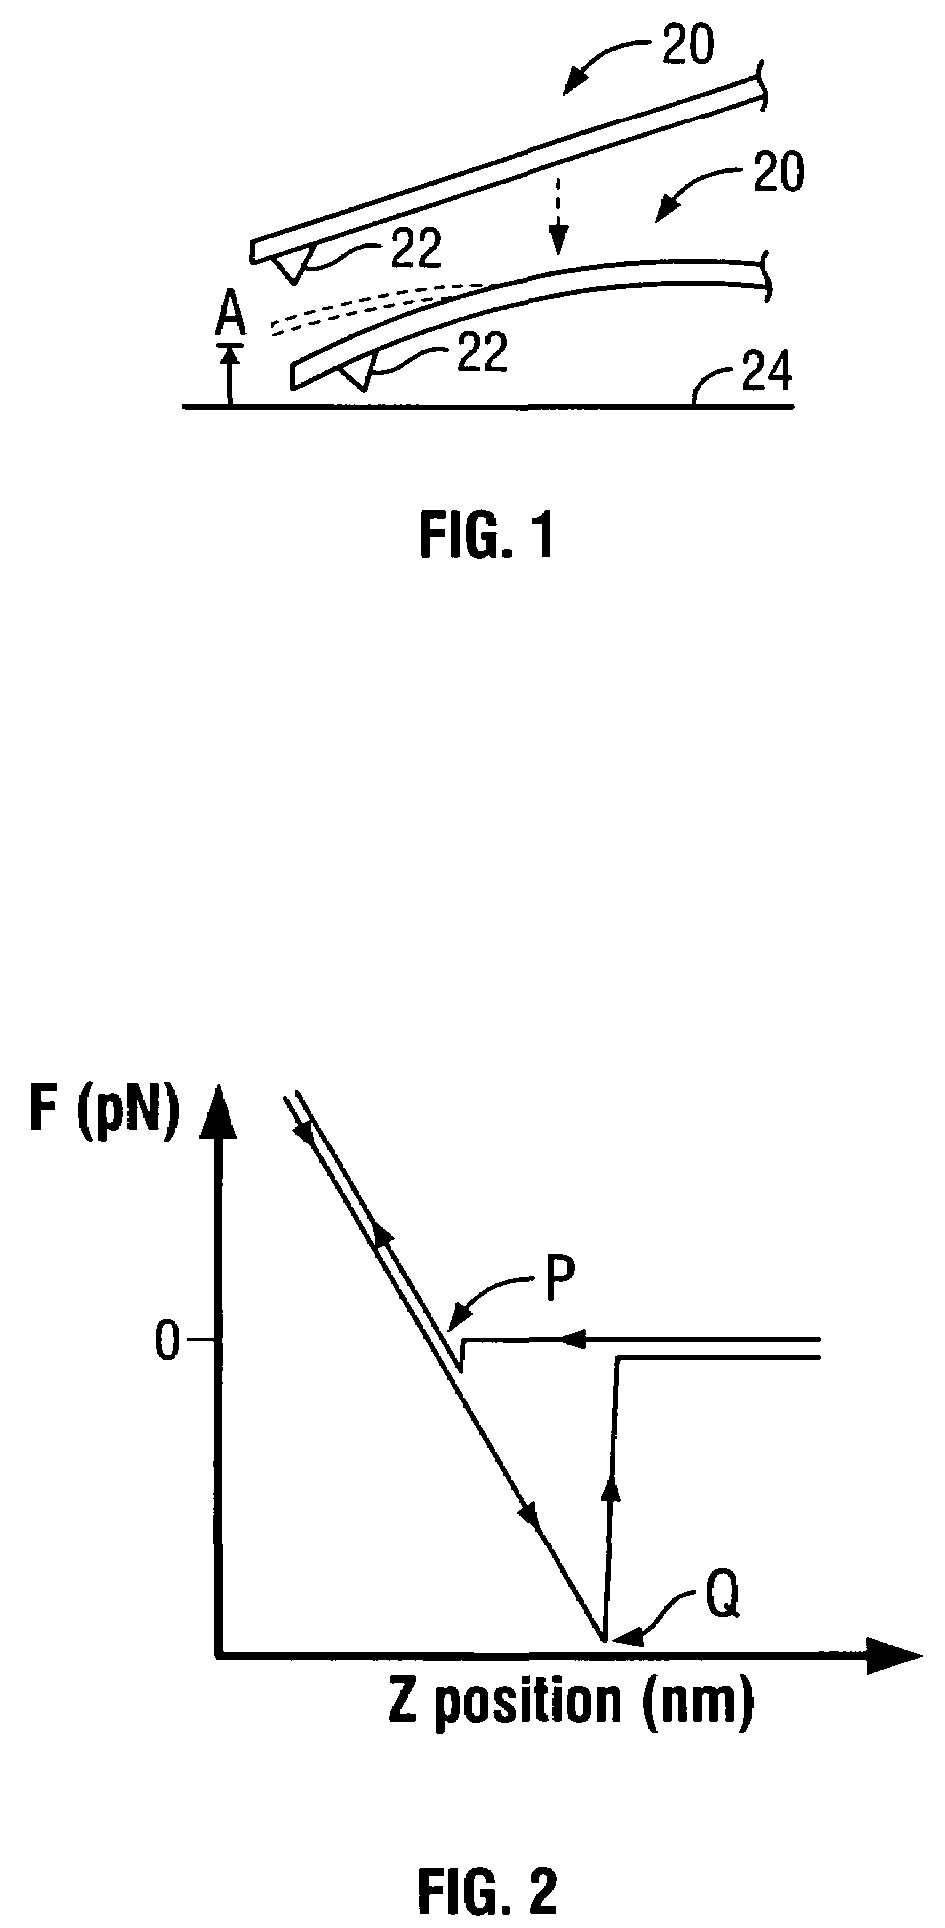 Method and apparatus for measuring electrical properties in torsional resonance mode